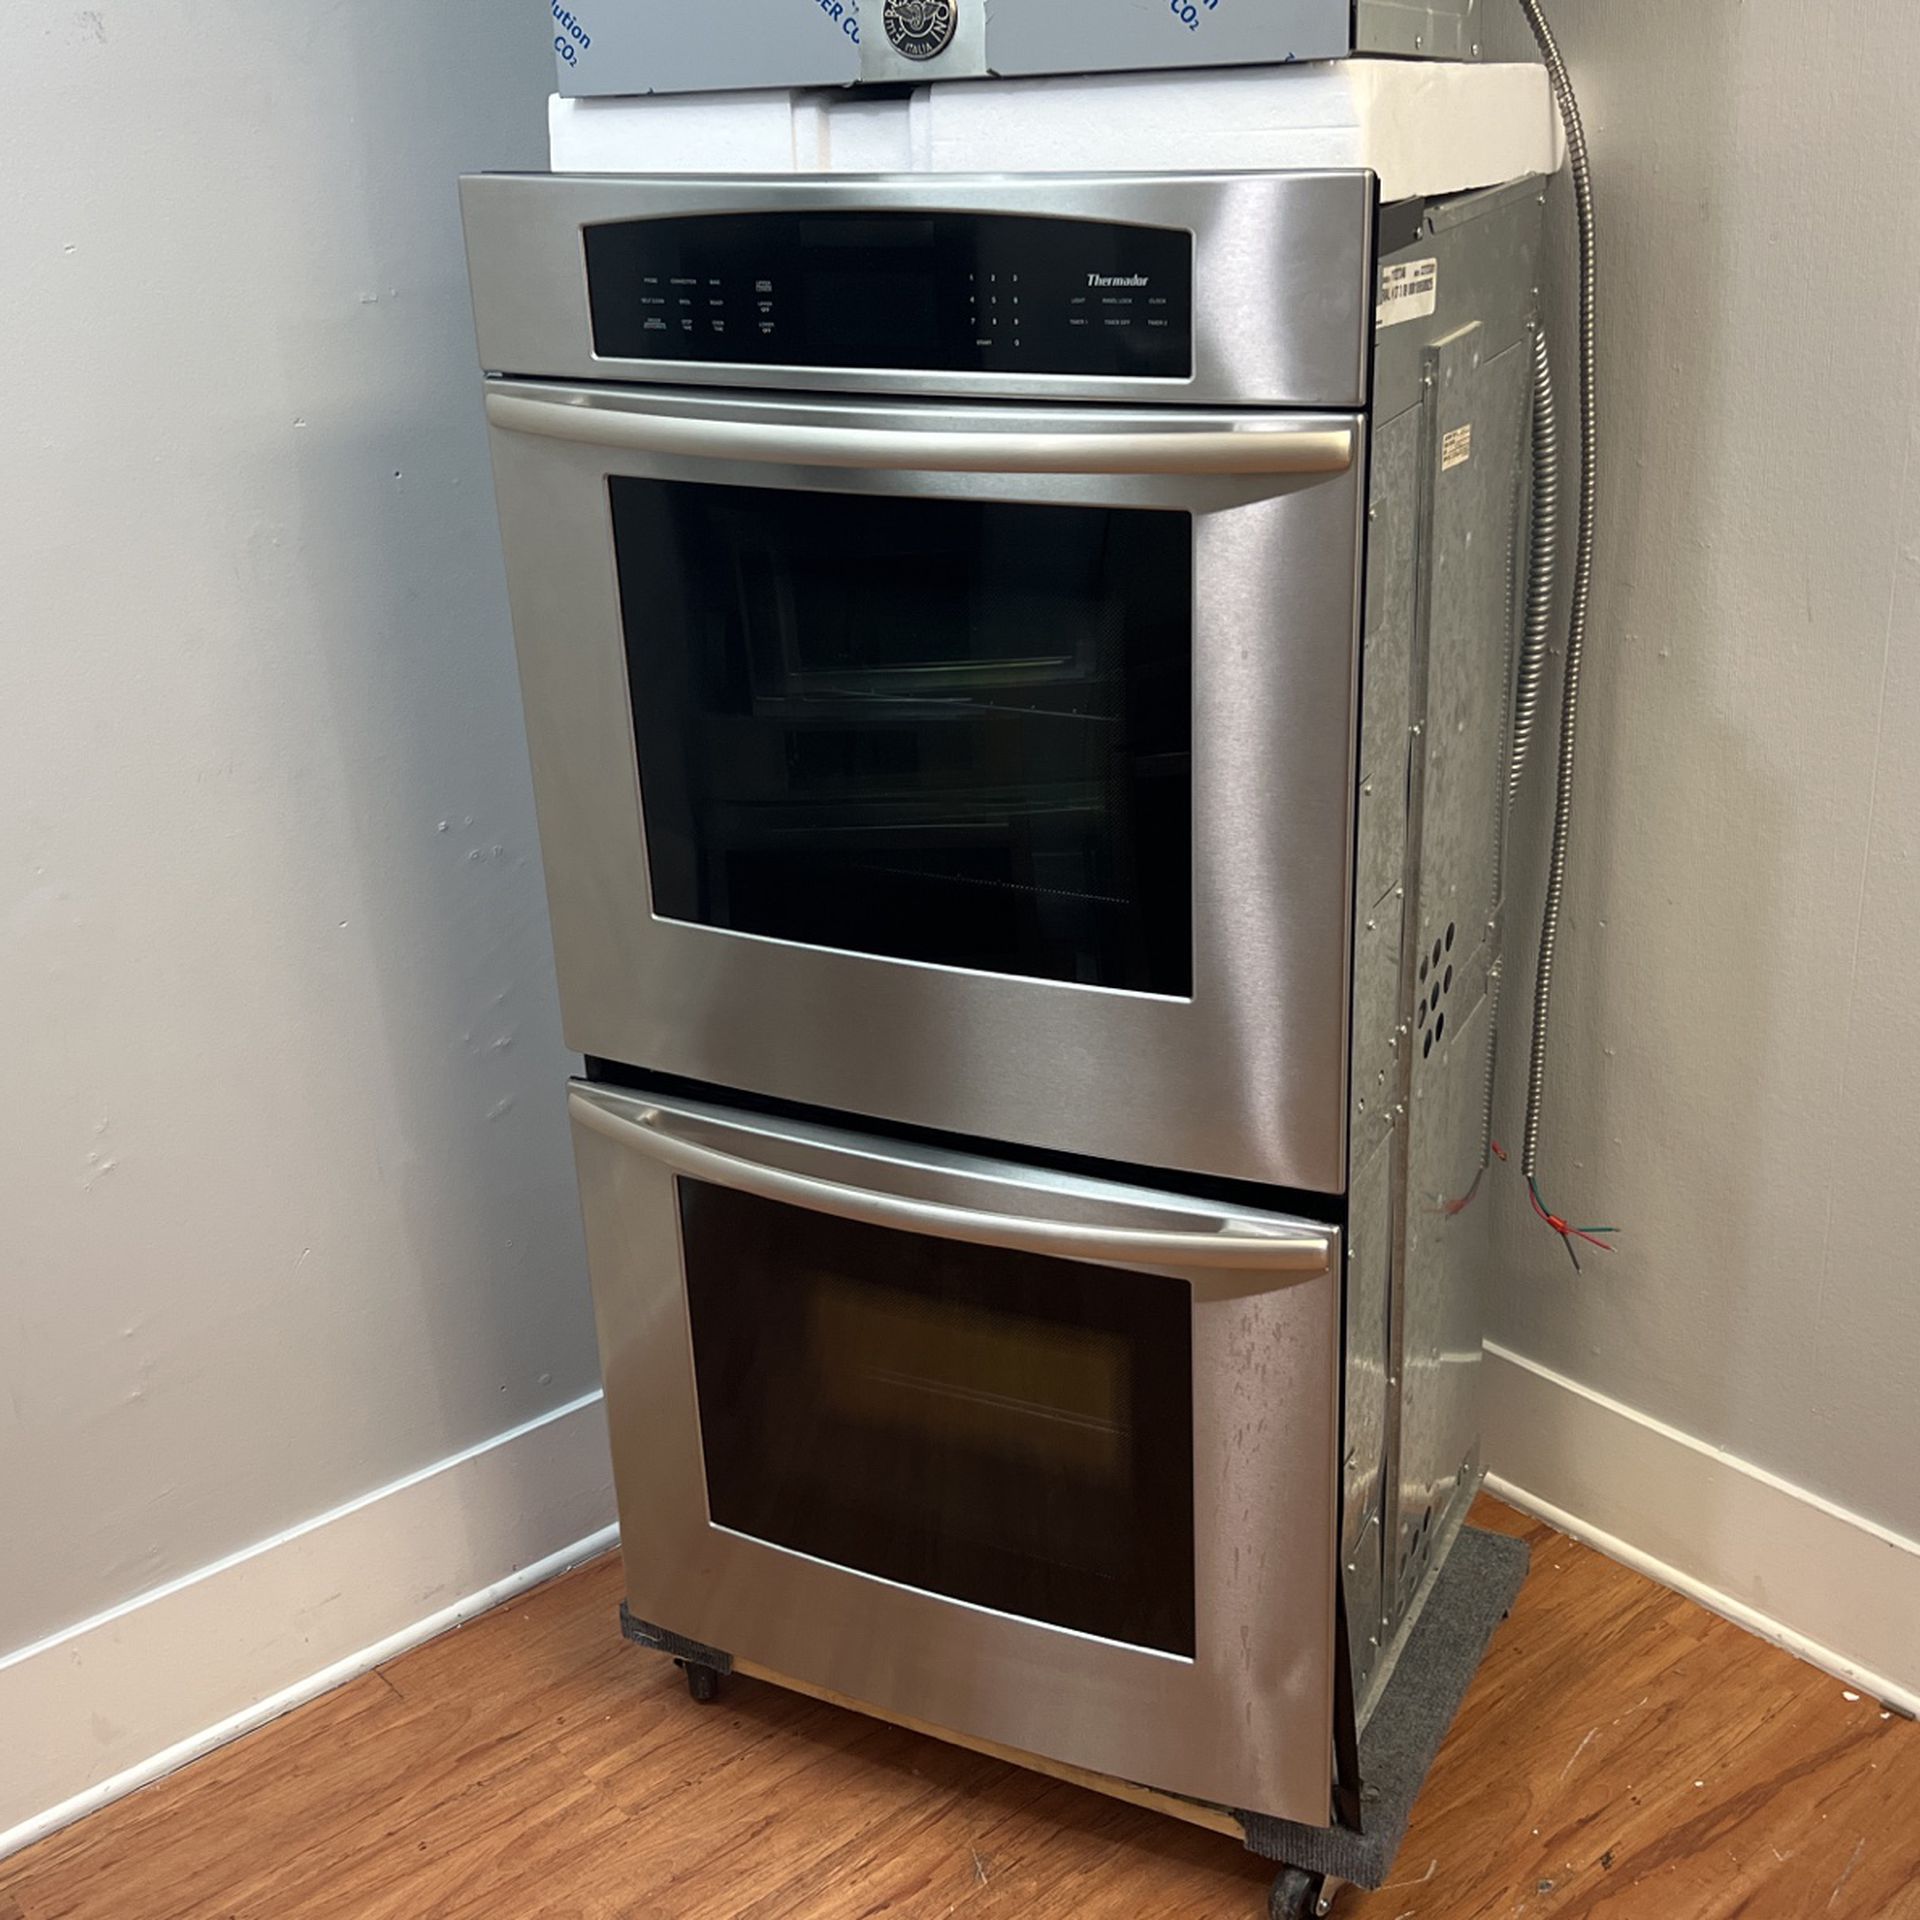 Thermador Double Oven 27"